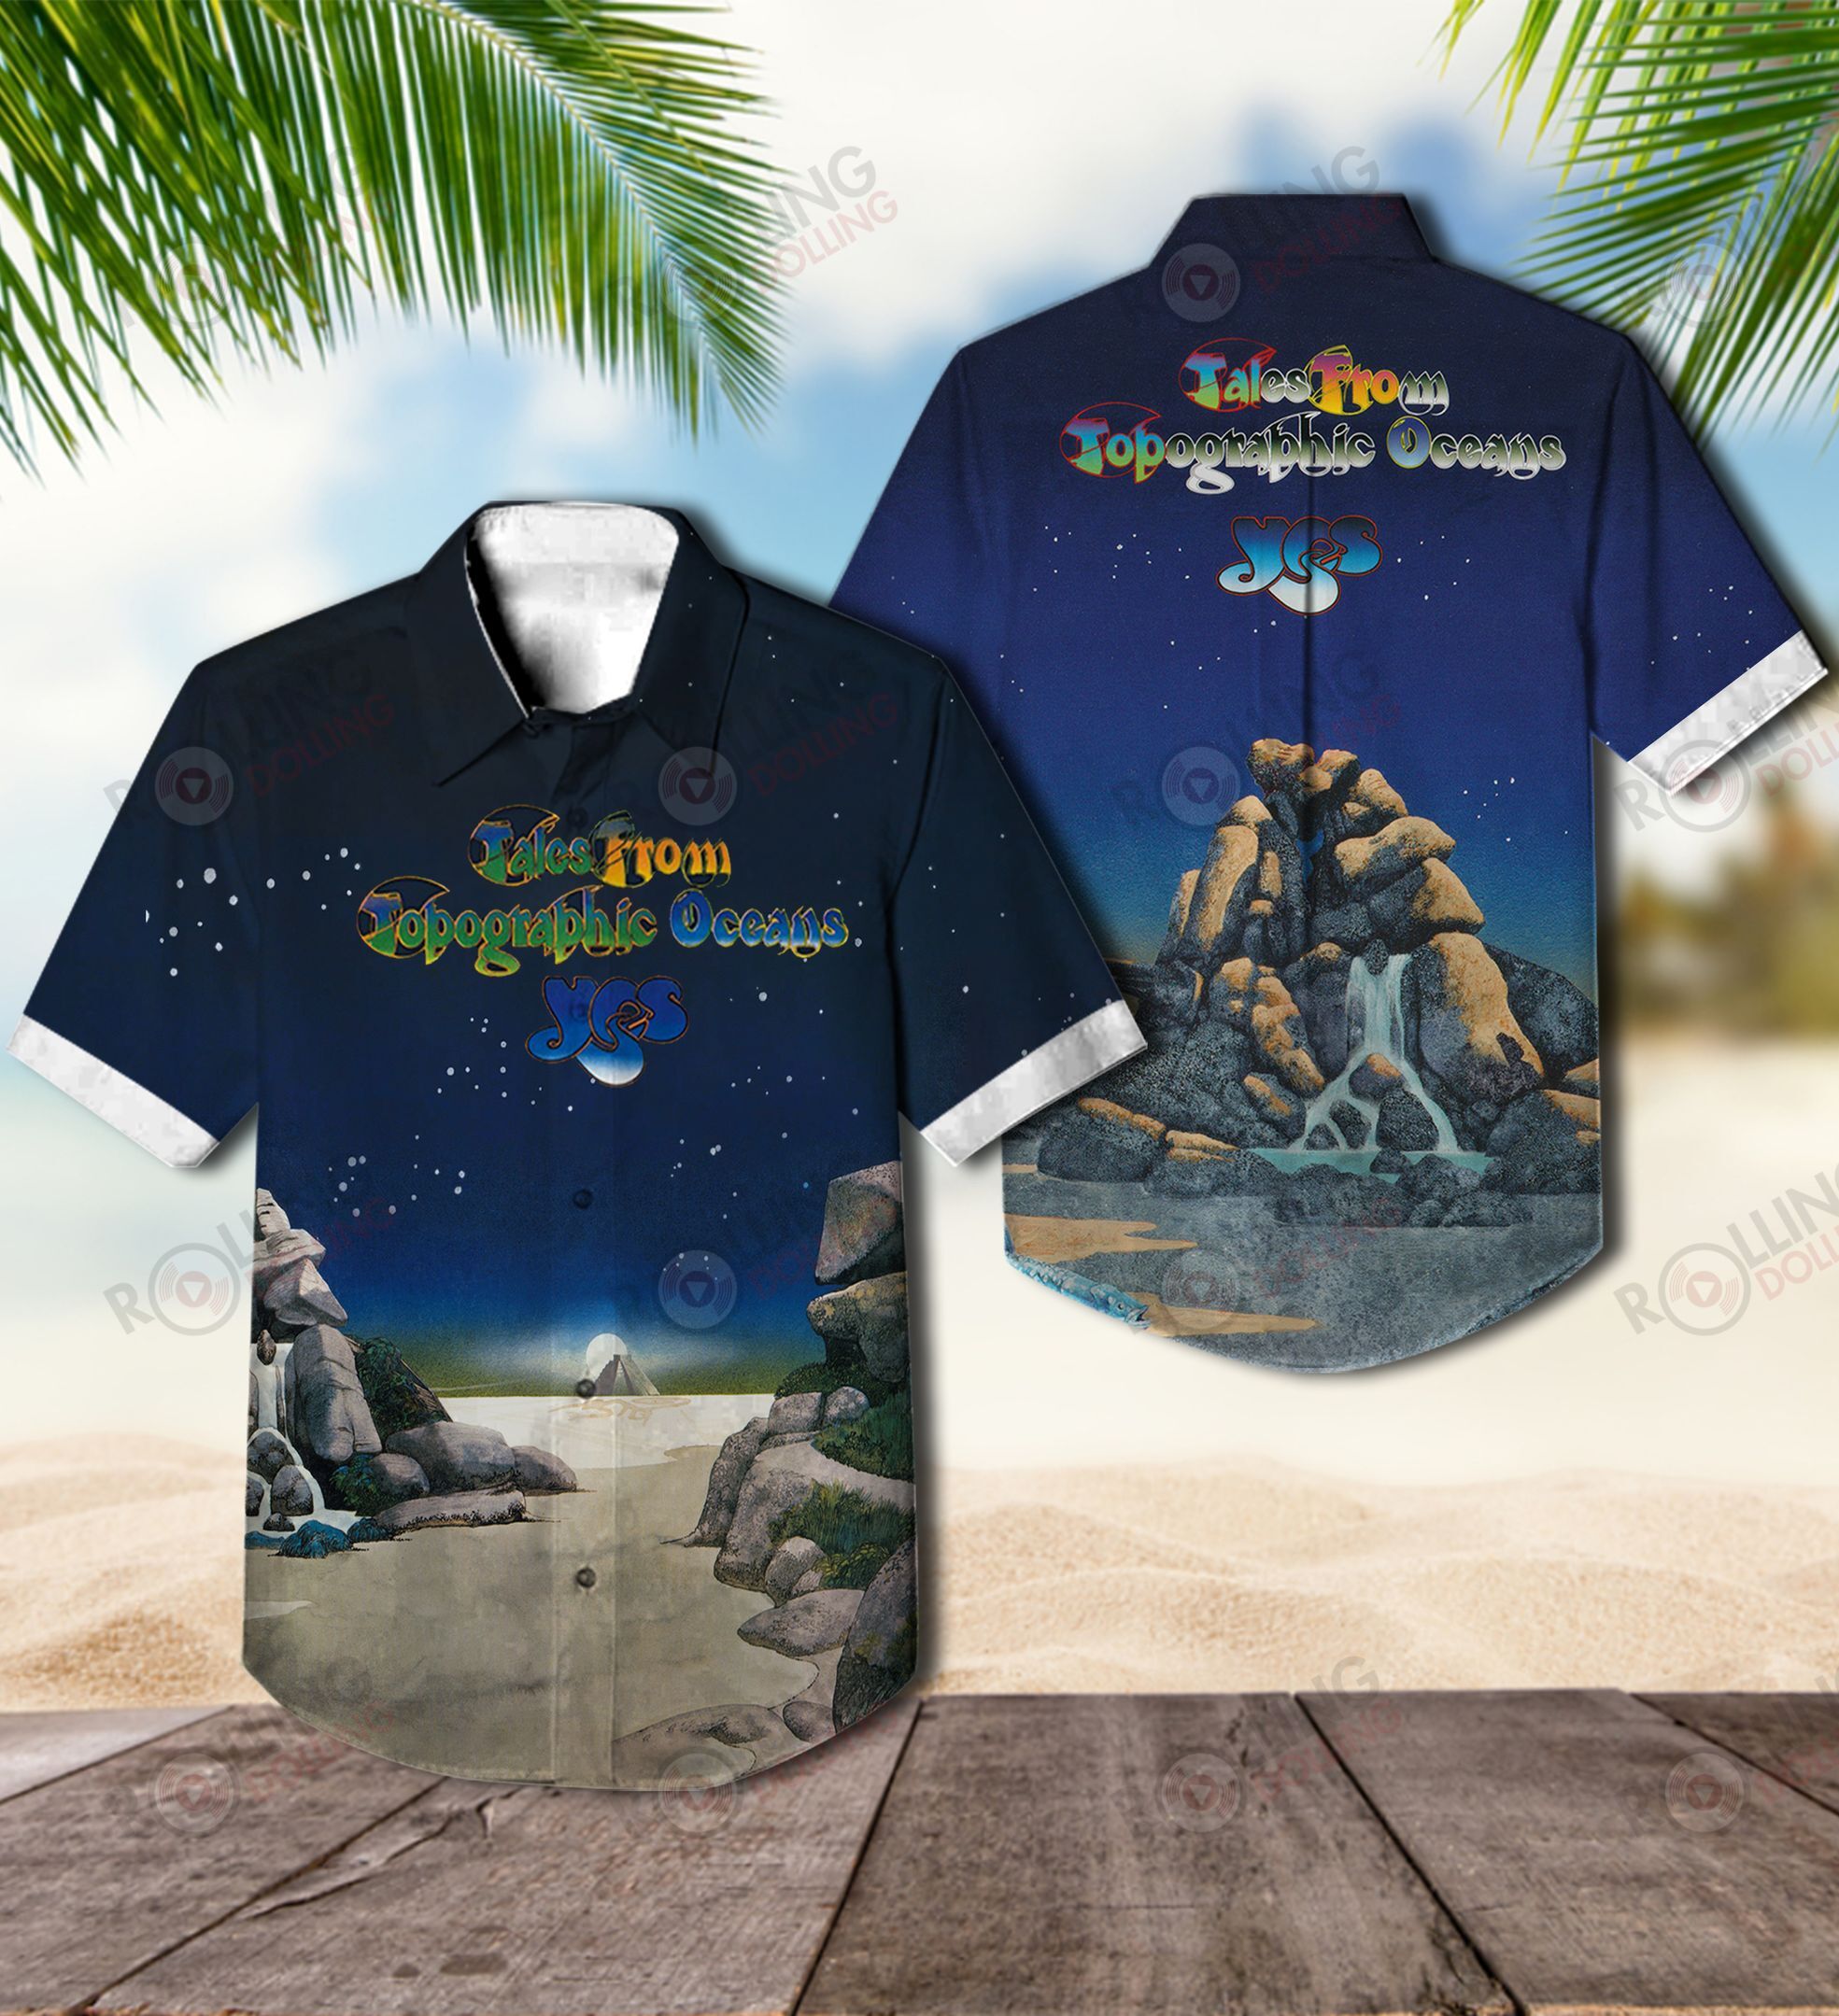 The Hawaiian Shirt is a popular shirt that is worn by Rock band fans 57